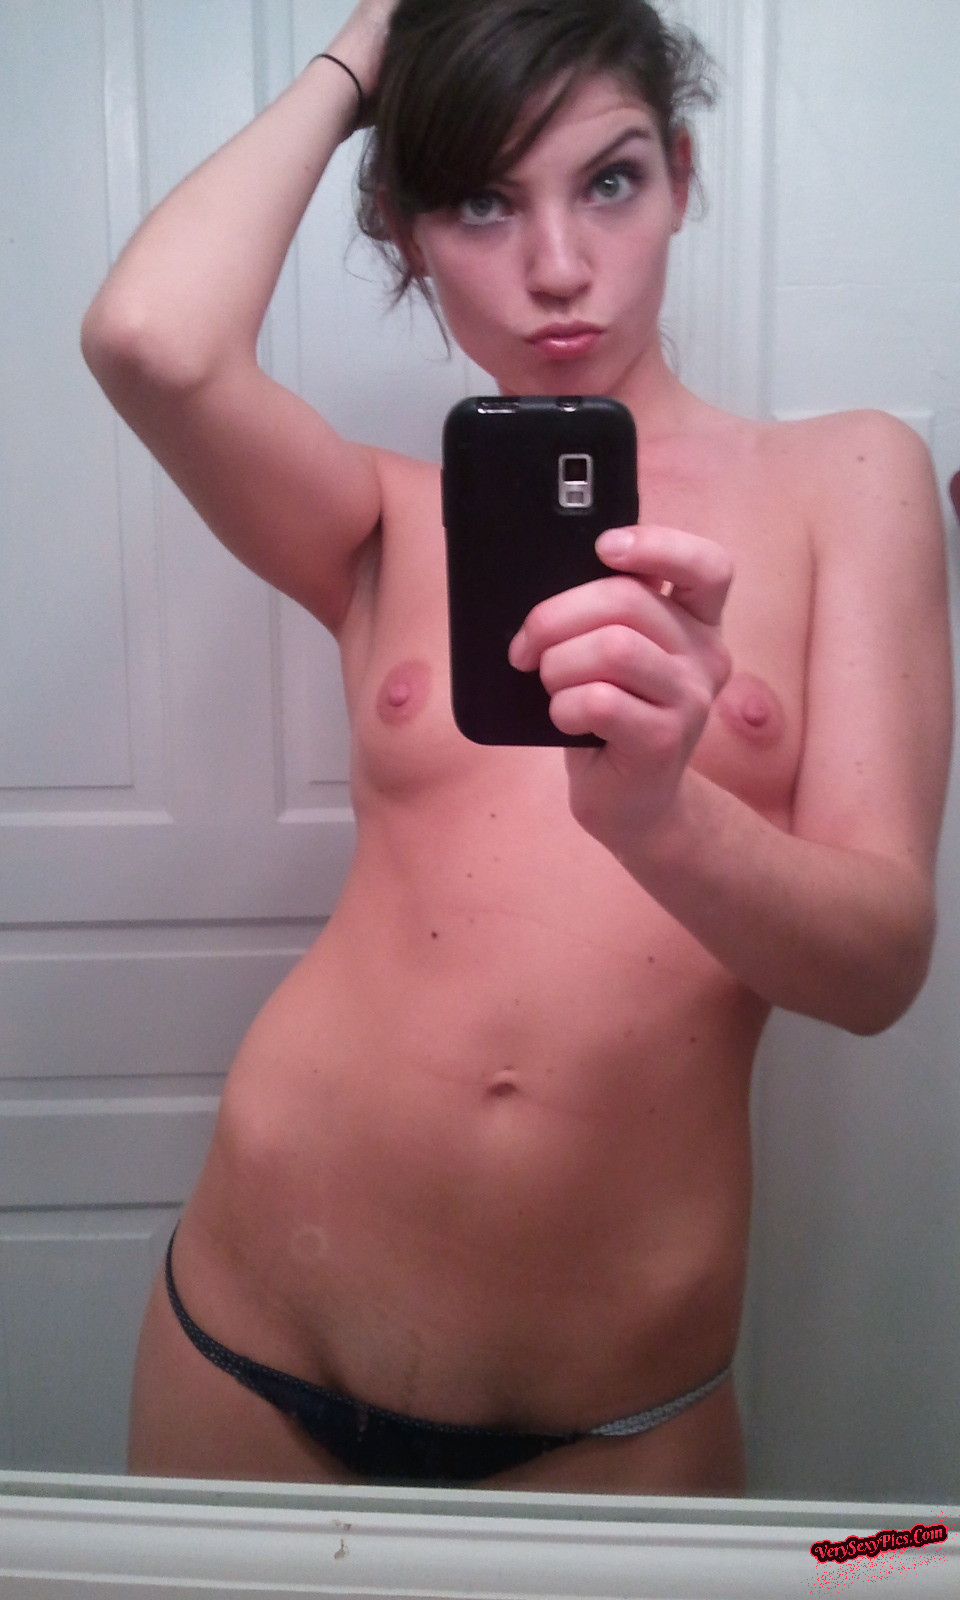 Leaked Homemade Snapchat Selfies of Young Hot Naked Amateurs